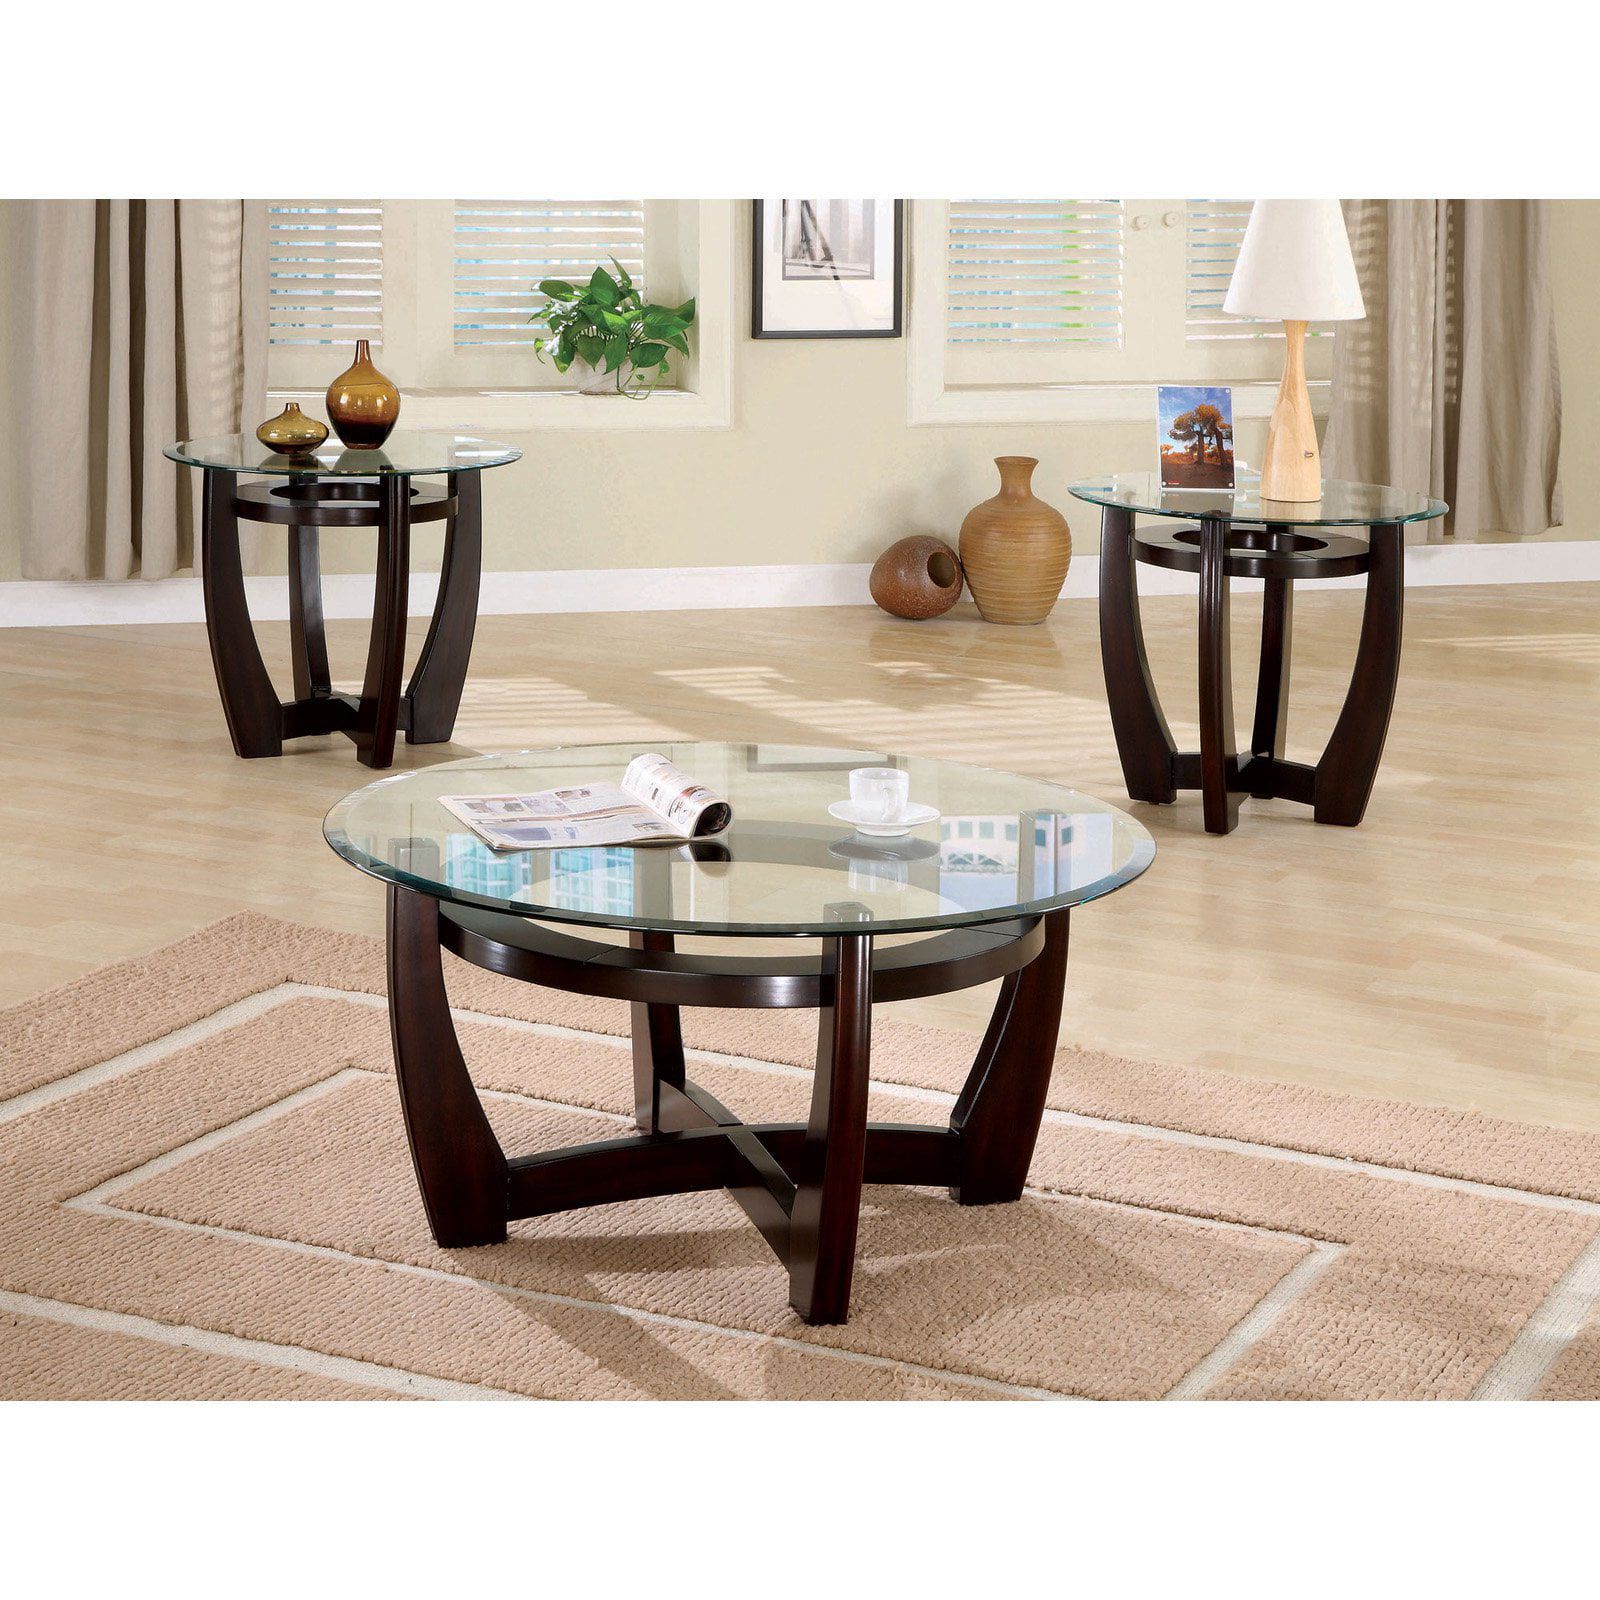 Coaster Furniture 3 Piece Glass Top Coffee Table Set – Walmart In Most Recent Glass Top Coffee Tables (View 9 of 15)